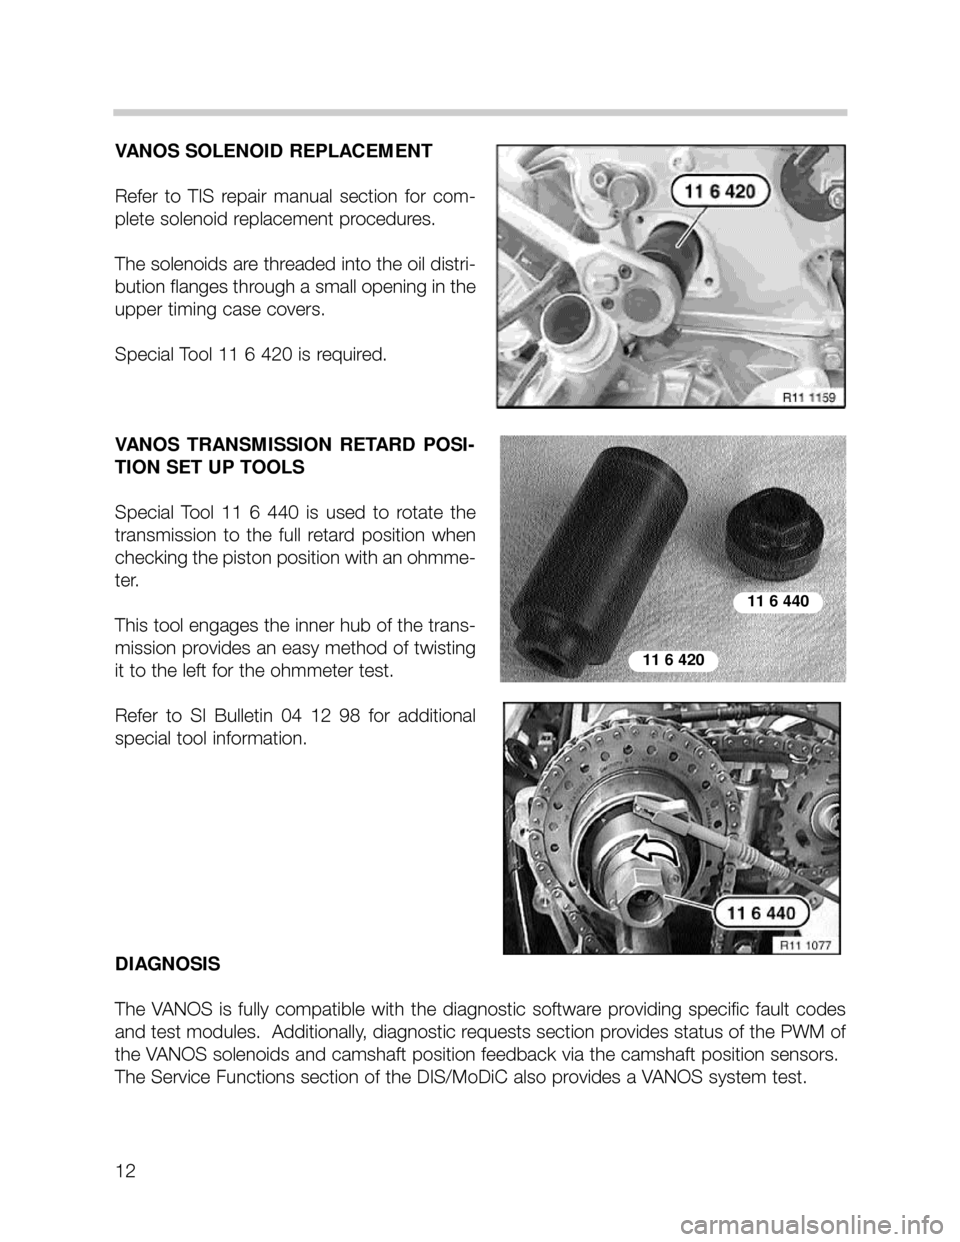 BMW 535i 2000 E39 M62TU Engine Workshop Manual 12
VANOS SOLENOID REPLACEMENT
Refer  to  TIS  repair  manual  section  for  com-
plete solenoid replacement procedures.  
The solenoids are threaded into the oil distri-
bution flanges through a small